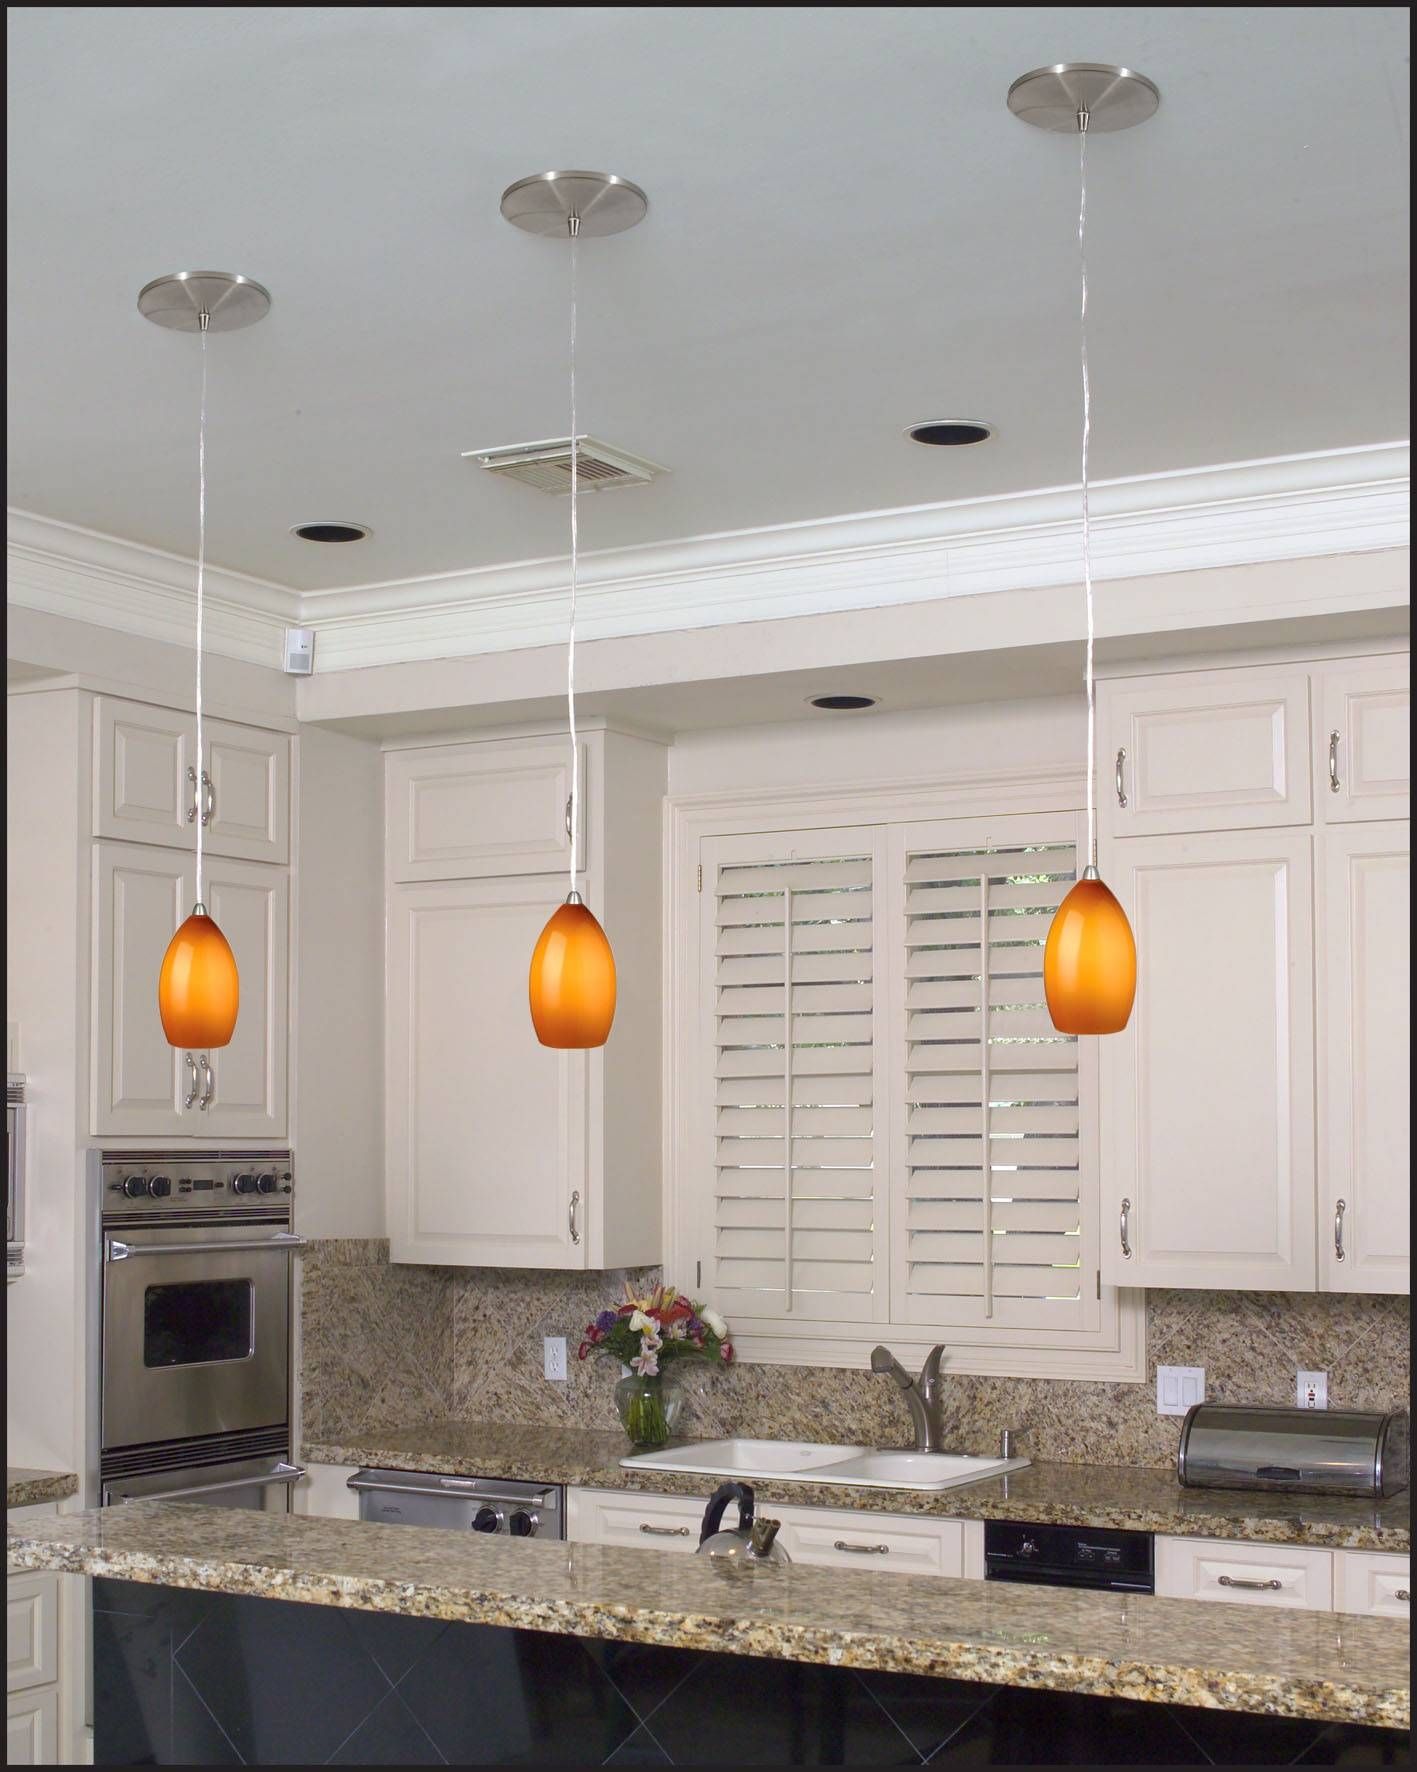 Convert A Recessed Light To A Pendant | Tribune Content Agency Throughout Recessed Lights To Pendant (Photo 15 of 15)